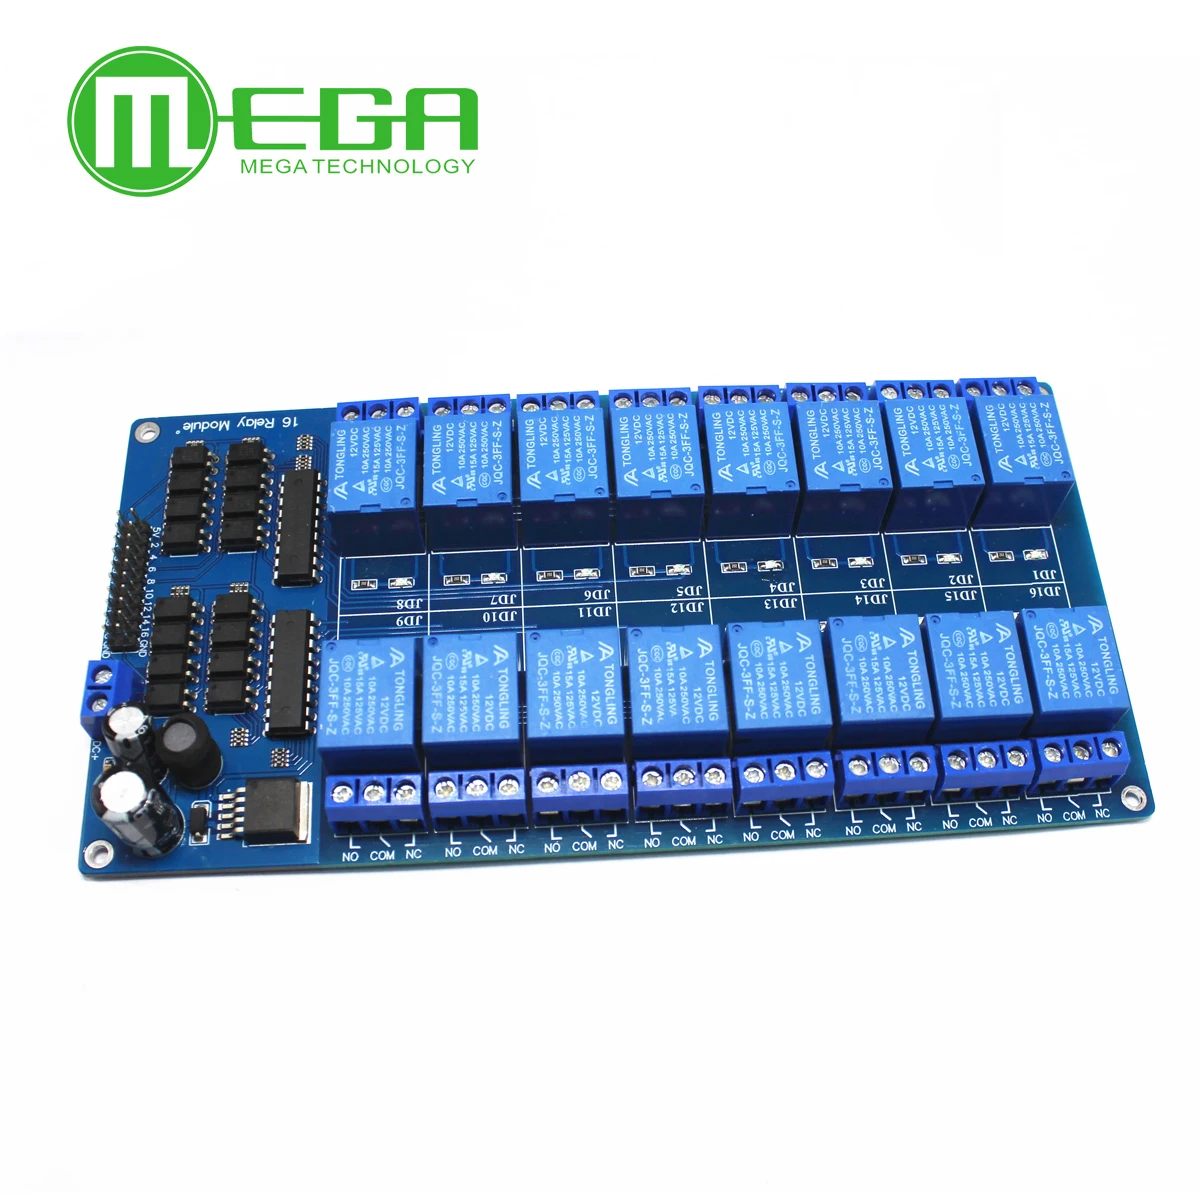 5v-12v-16-channel-relay-module-interface-board-for-arduino-pic-arm-dsp-plc-with-optocoupler-protection-lm2576-power-16channel